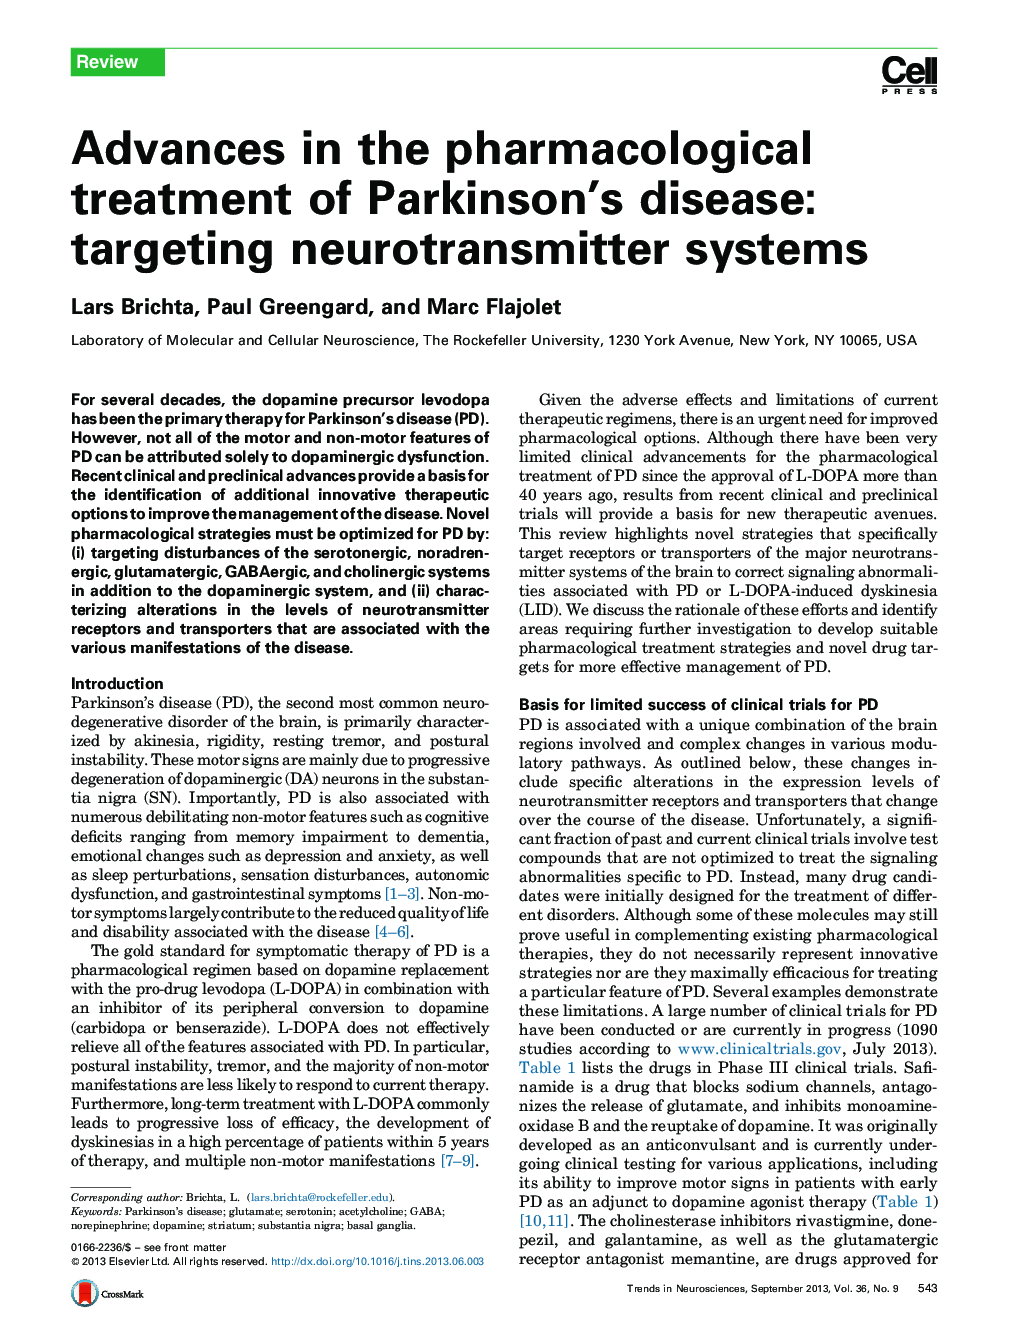 Advances in the pharmacological treatment of Parkinson's disease: targeting neurotransmitter systems